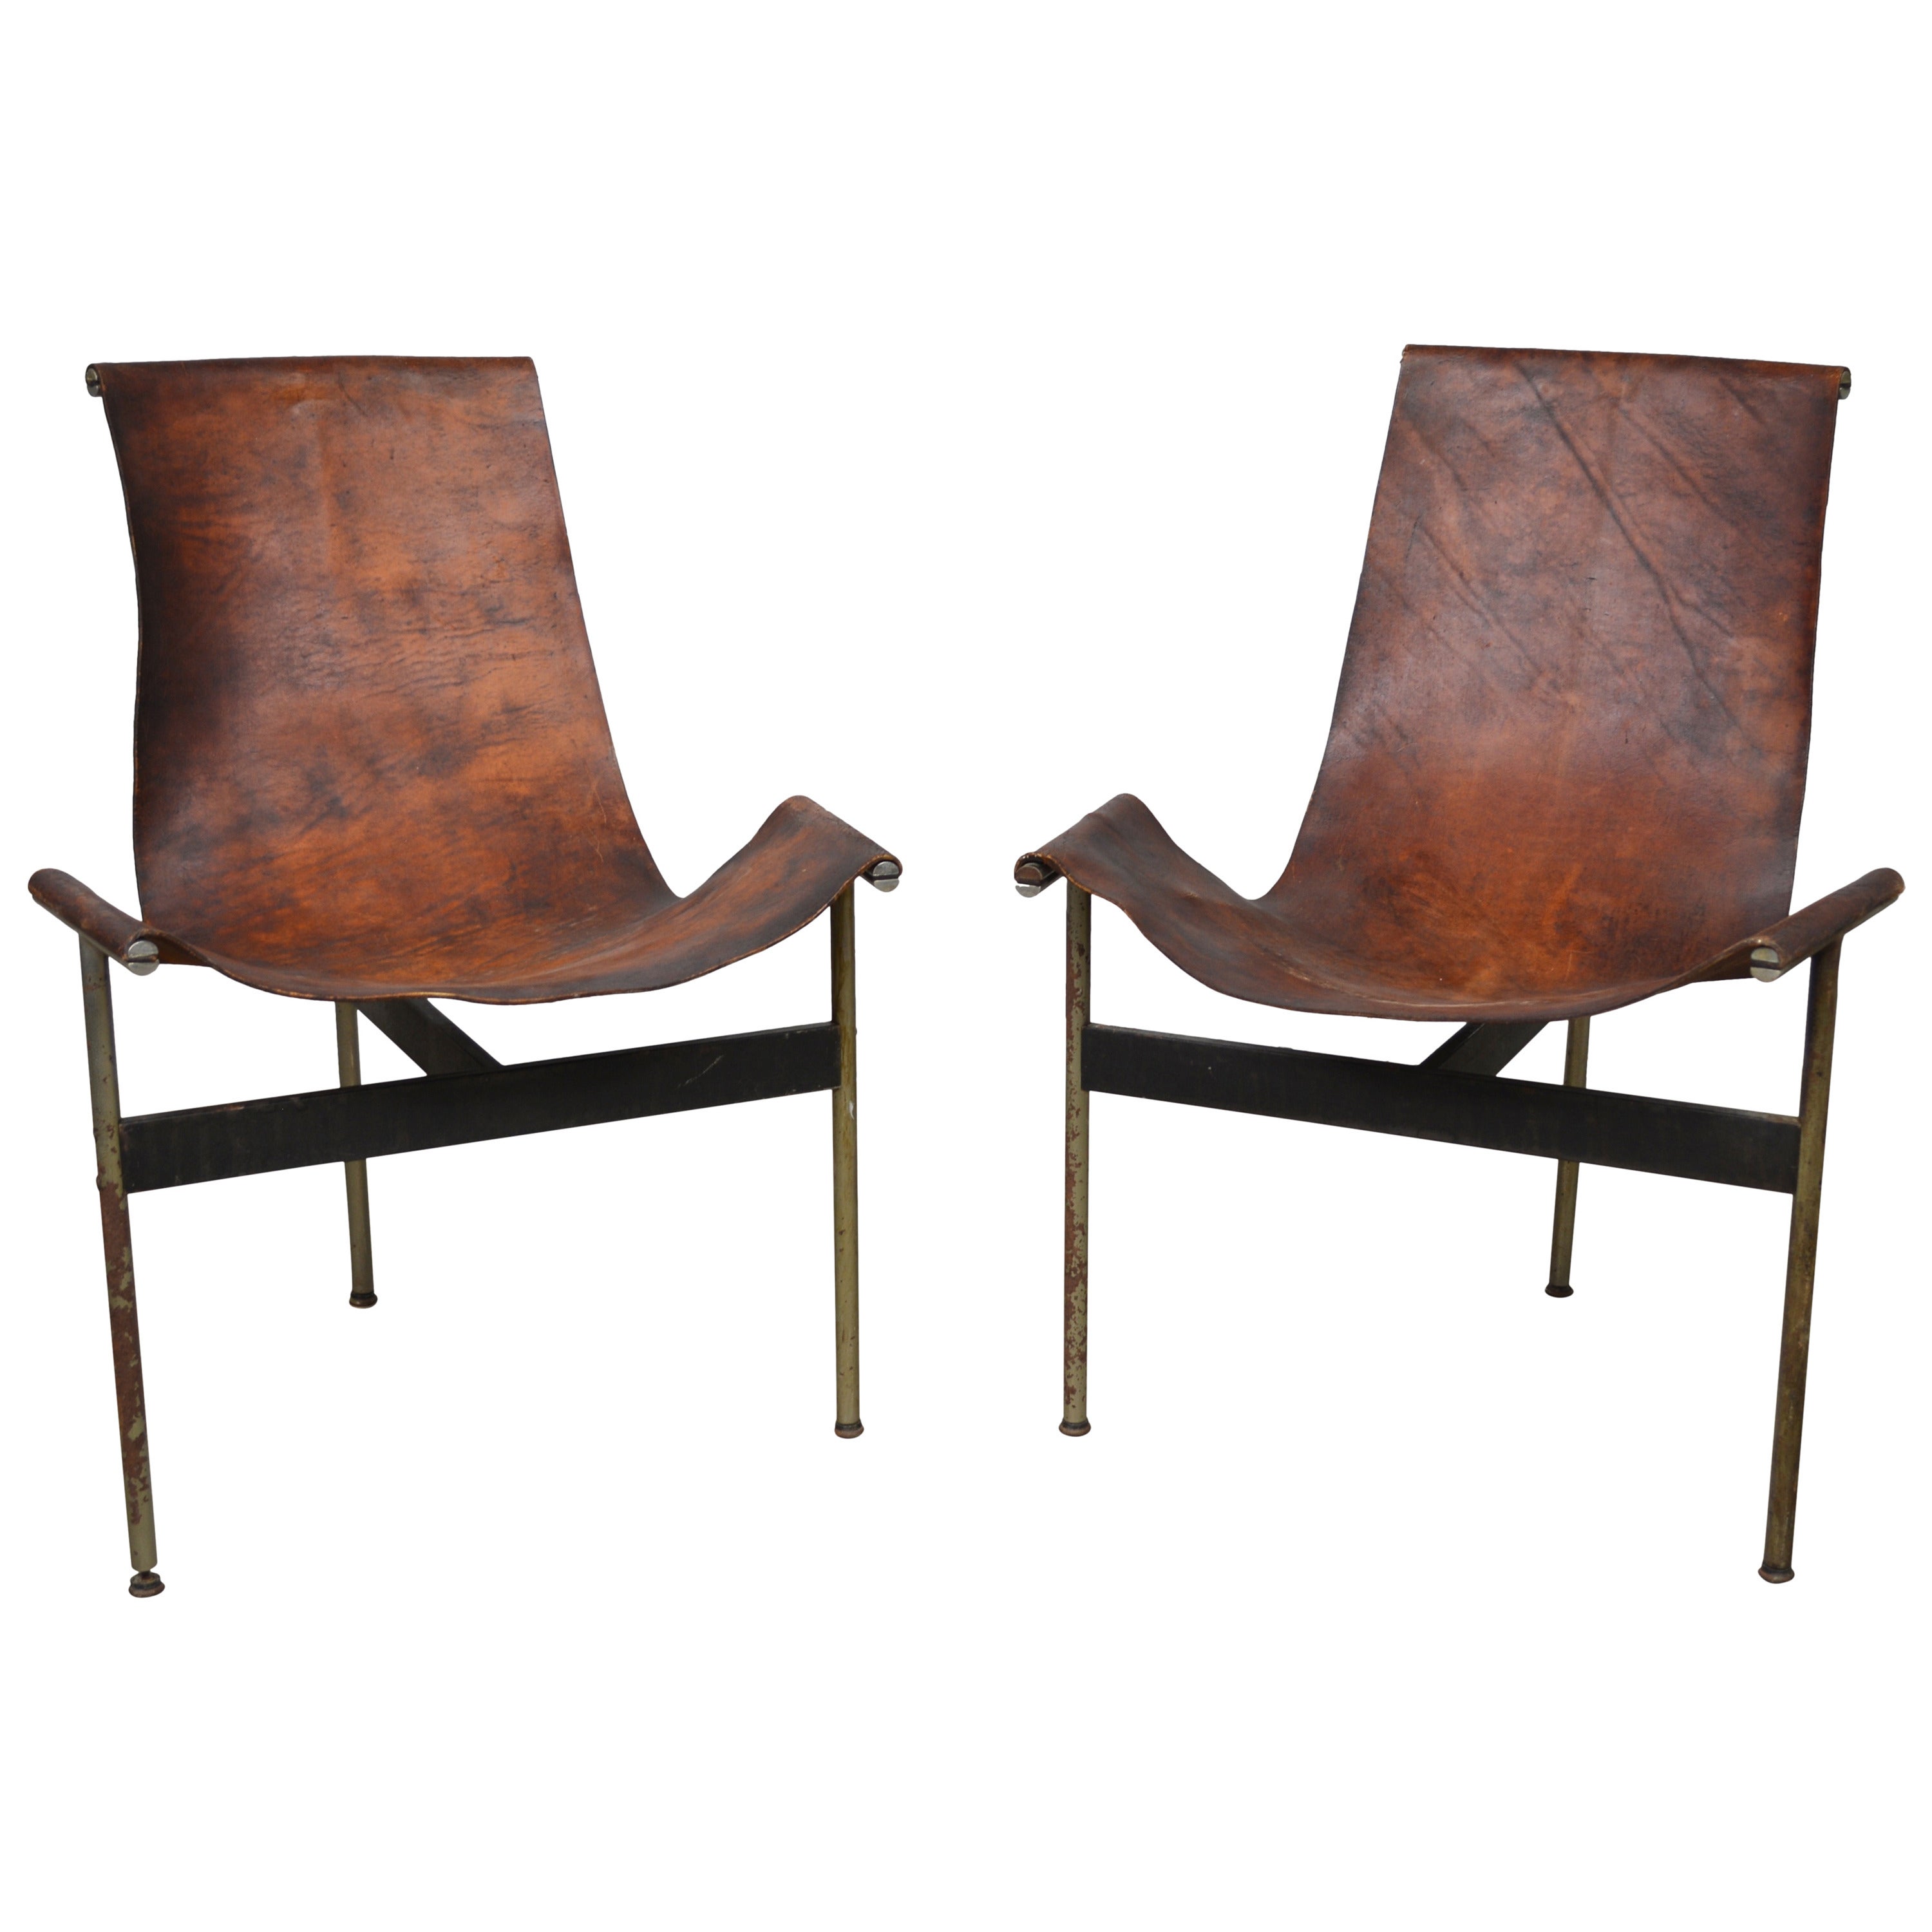 Pair of "T" Chair by Katavolos, Littell and Kelly for Laverne